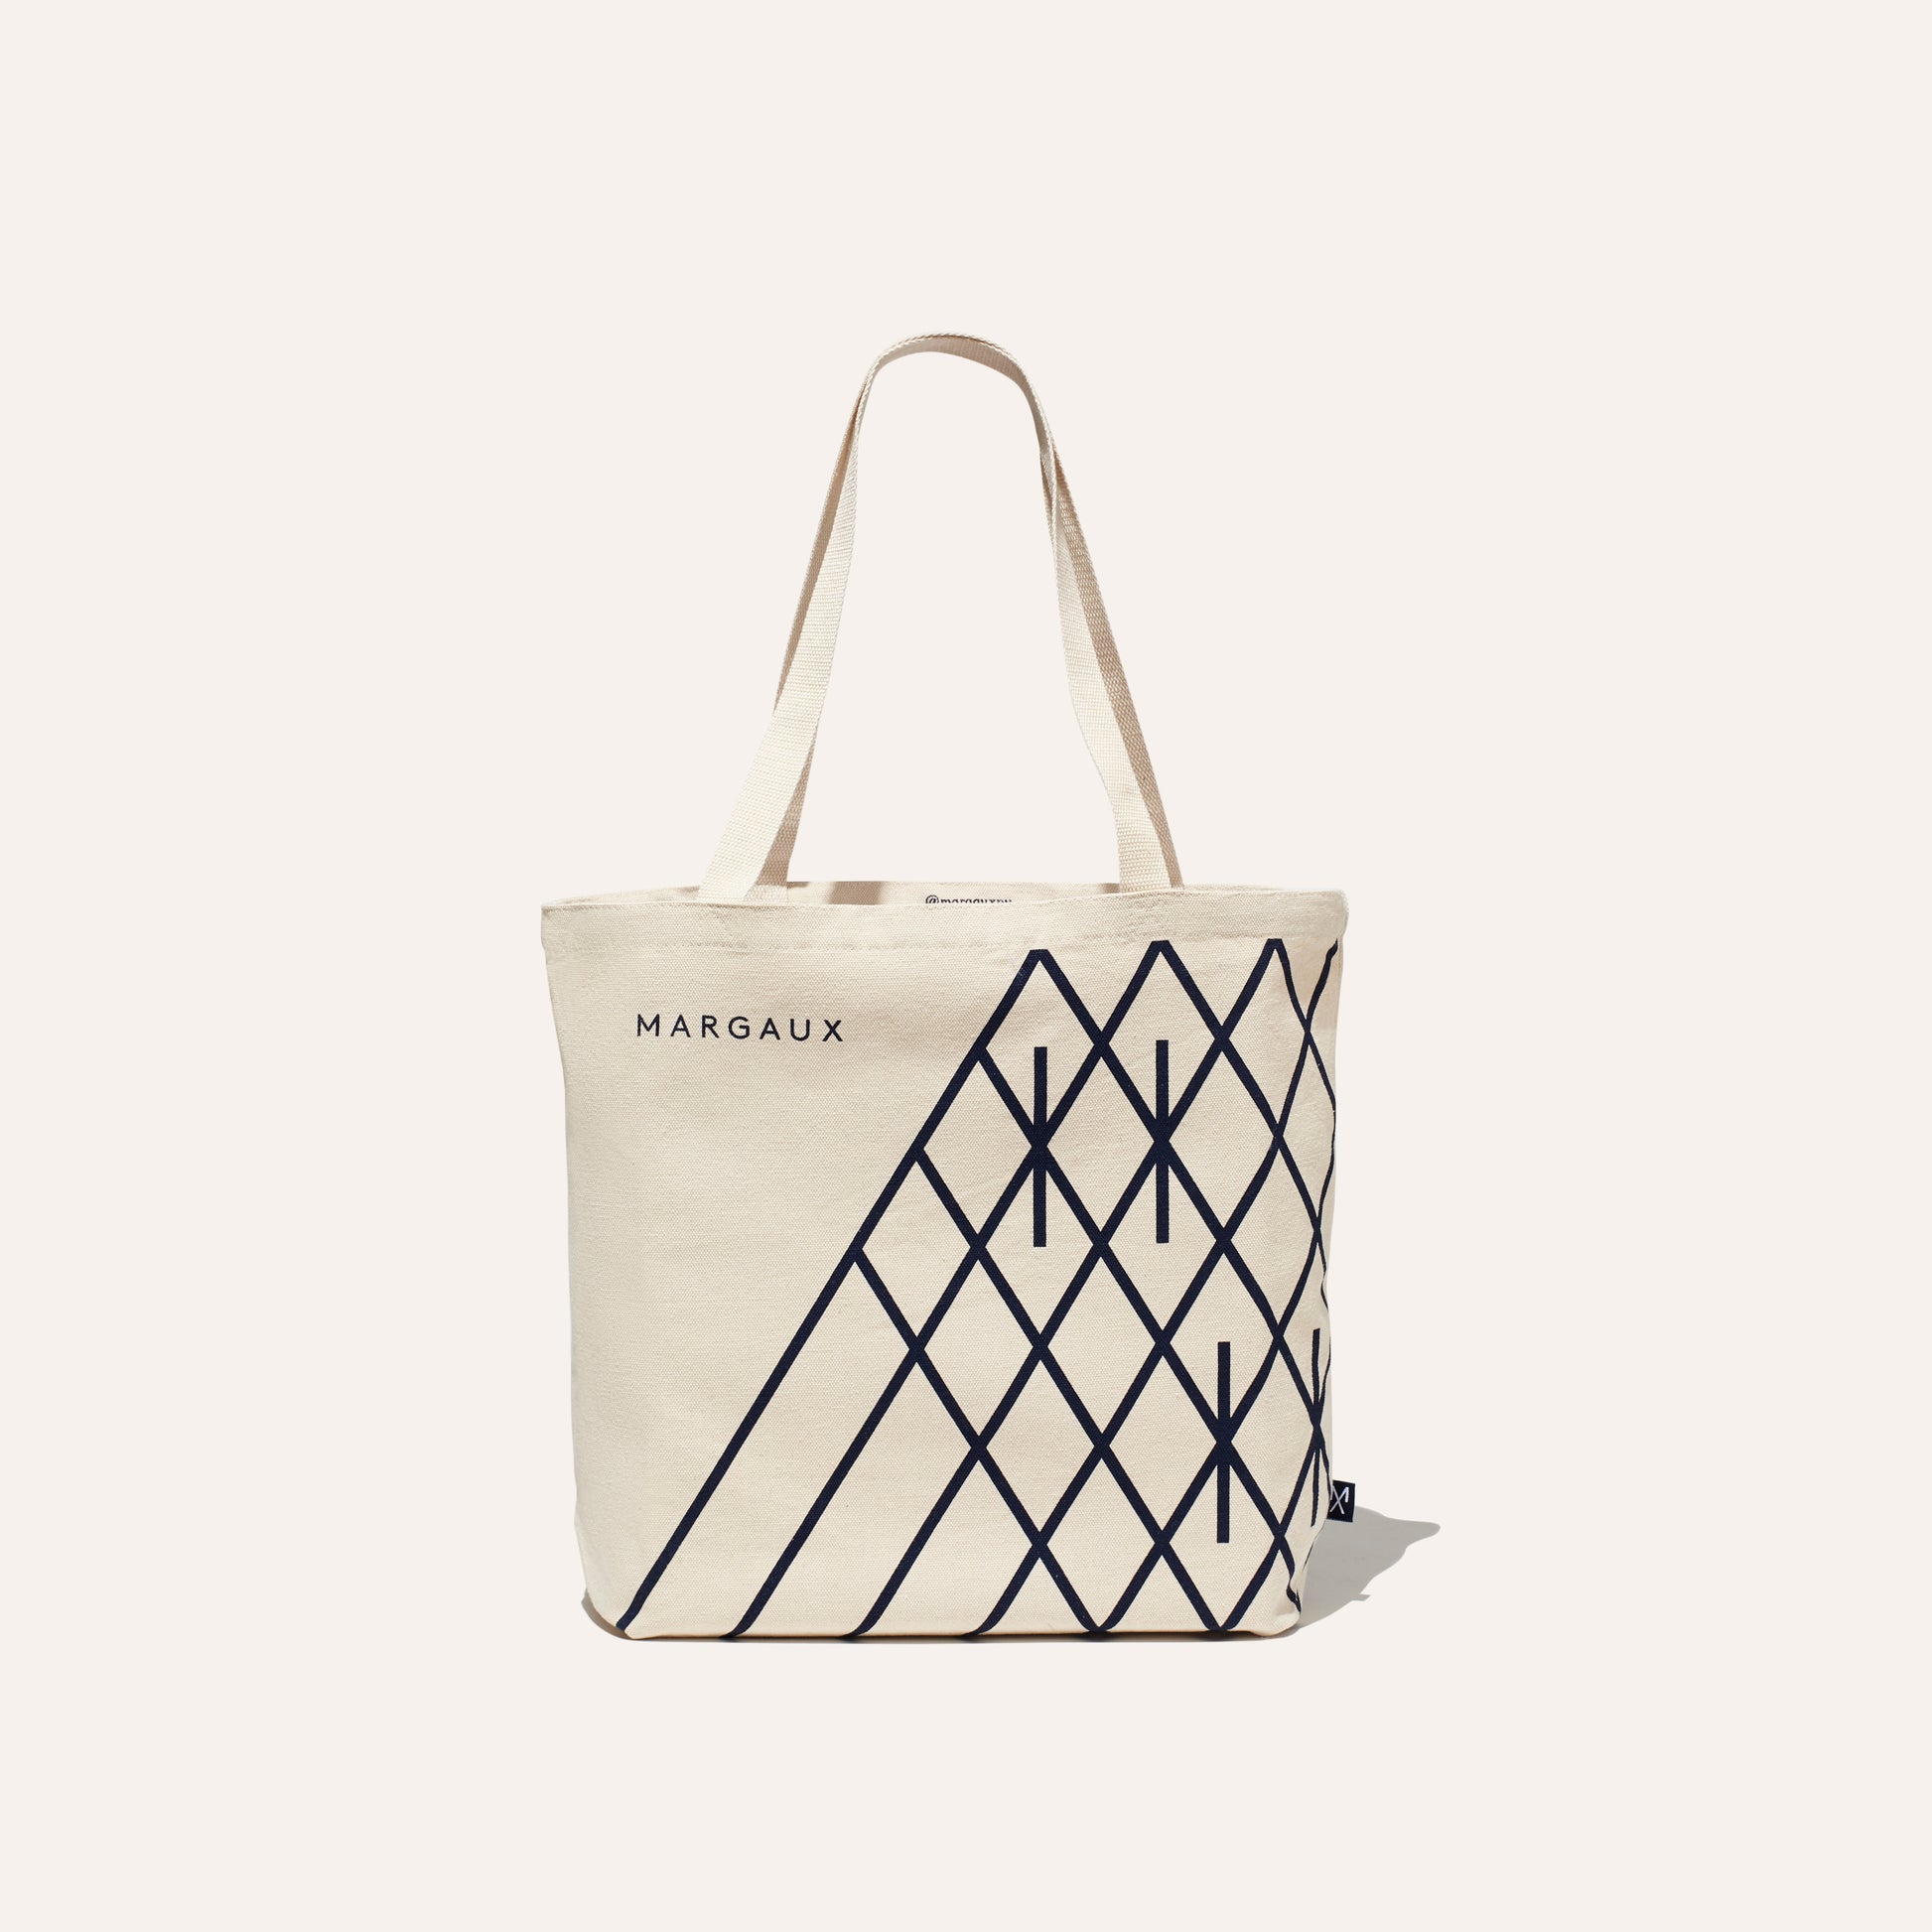 The Cotton Tote – Margaux